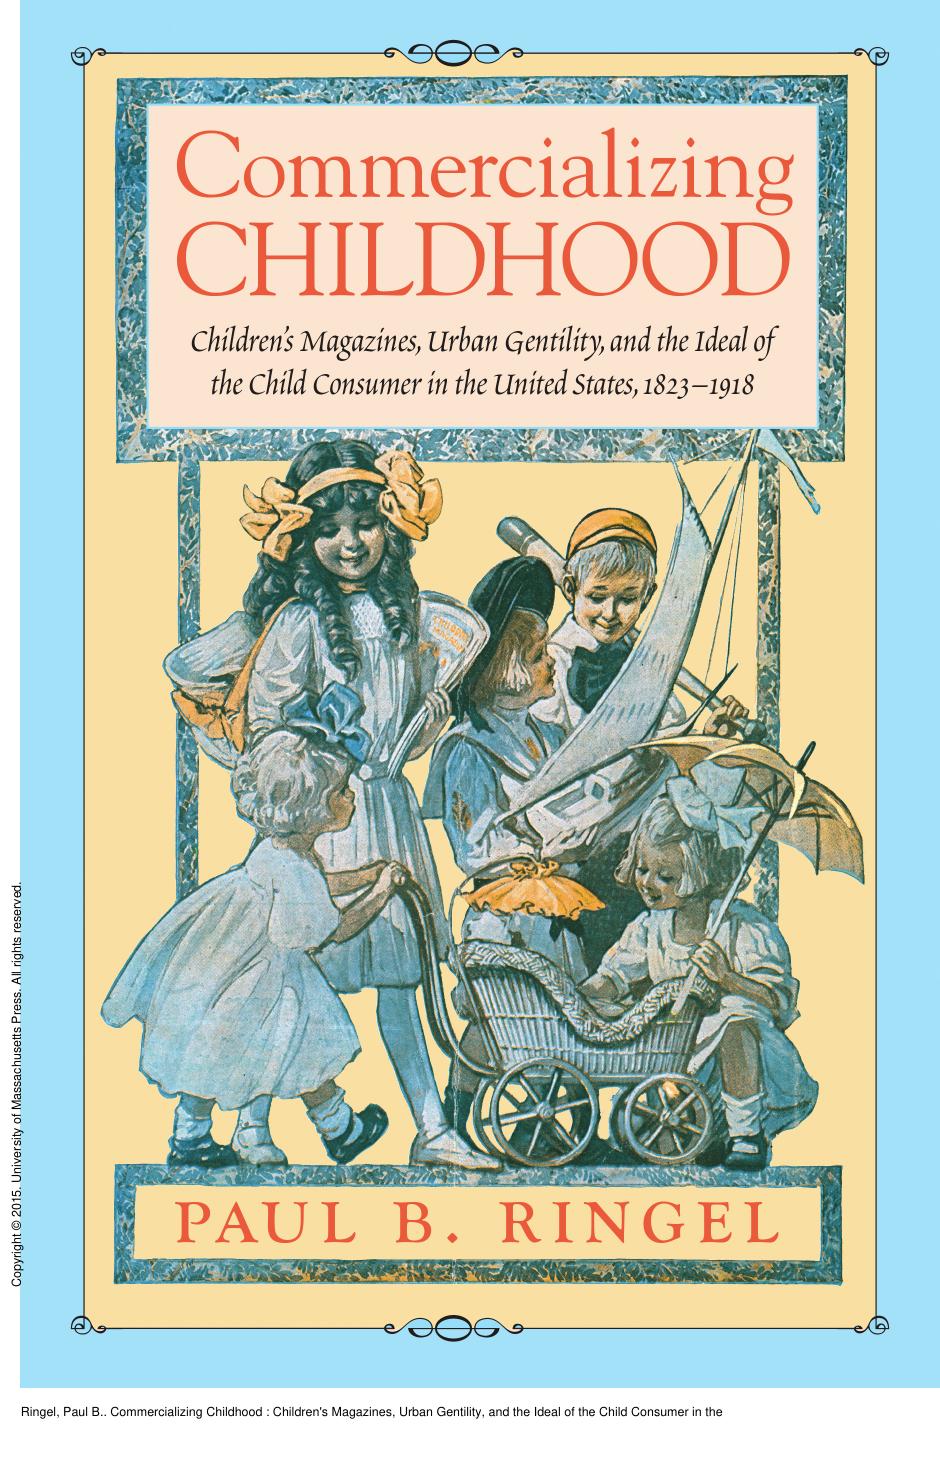 Commercializing Childhood: Children's Magazines, Urban Gentility, and the Ideal of the Child Consumer in the United States, 1823-1918 by Paul B. Ringel